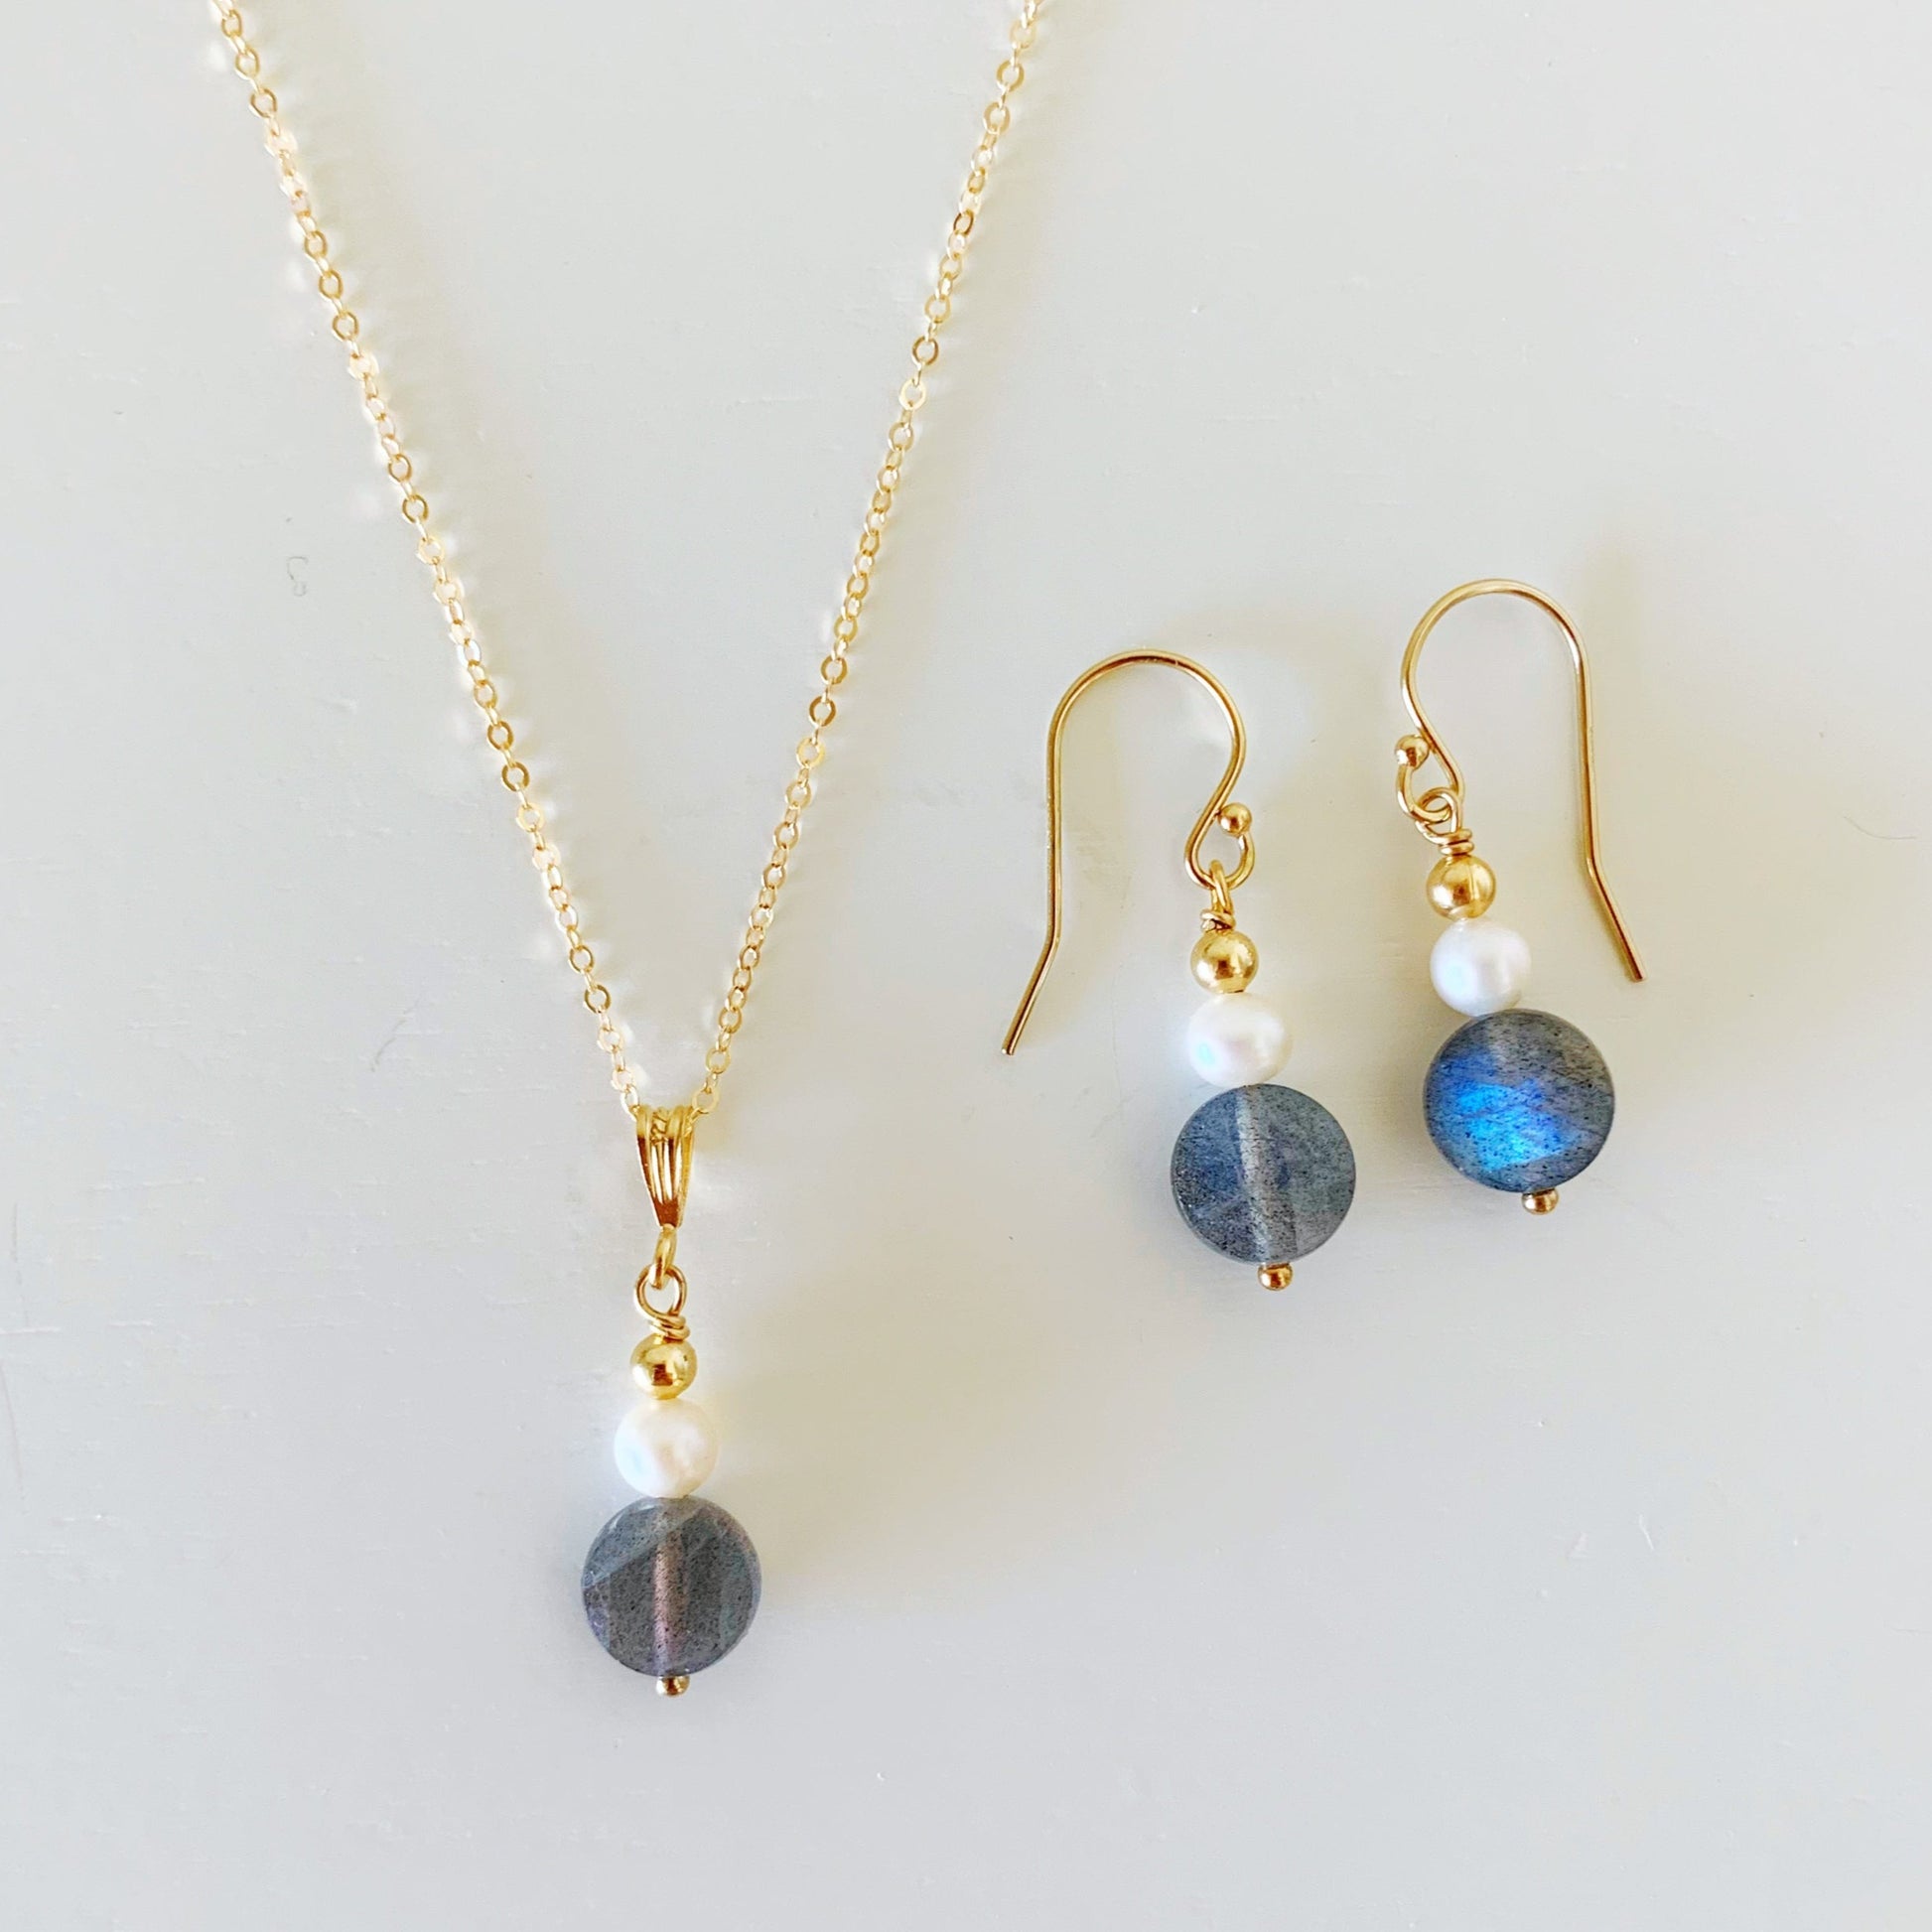 the arctic pendant and earrings by mermaids and madeleines are designed with small freshwater pearls, faceted labradorite coins and 14k gold filled findings and chain